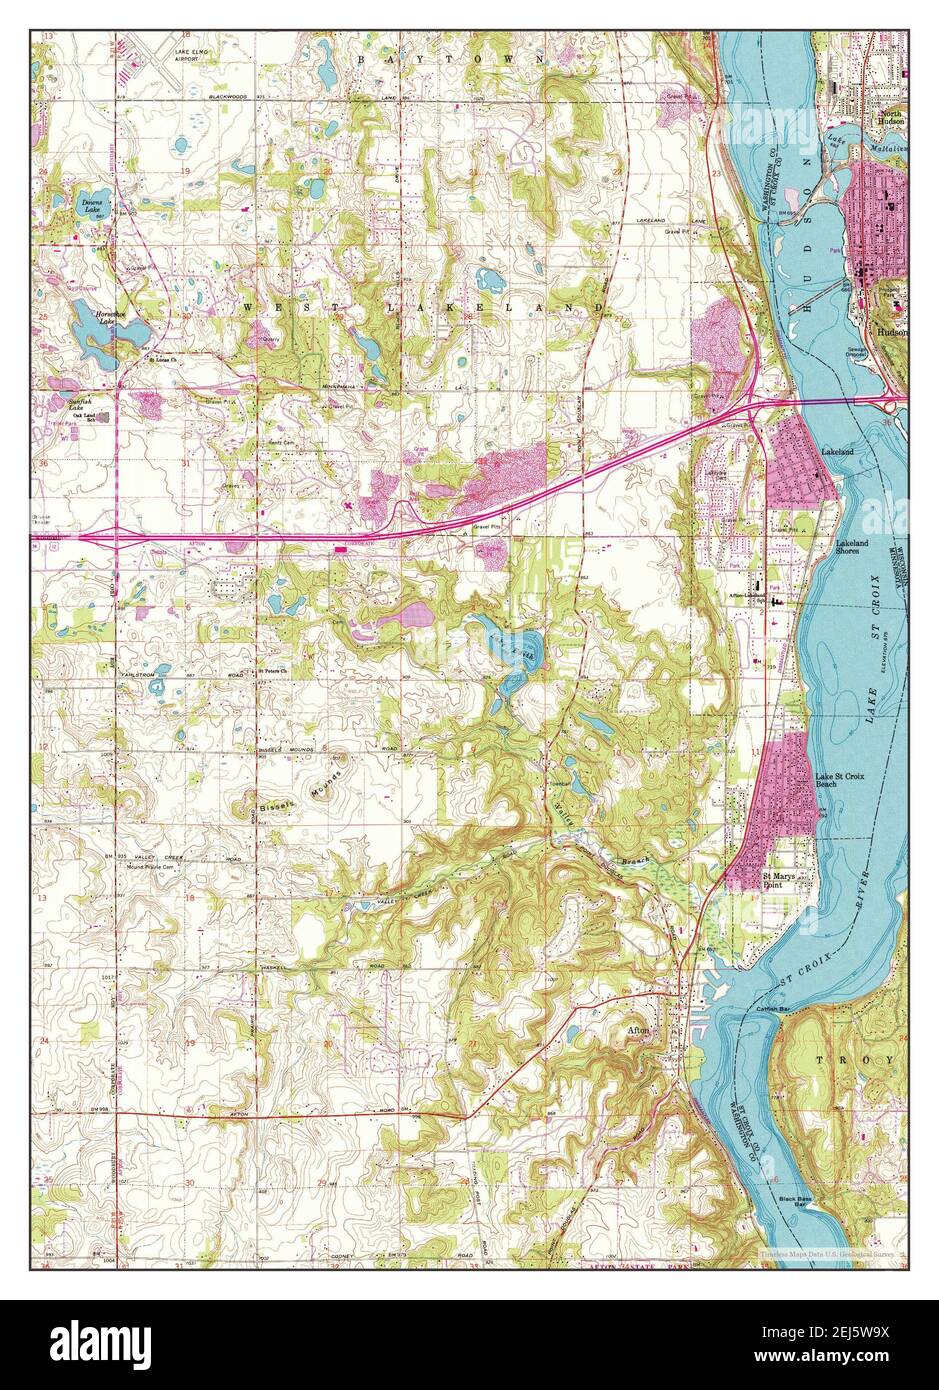 Hudson Wisconsin Map 1967 124000 United States Of America By Timeless Maps Data Us Geological Survey 2EJ5W9X 